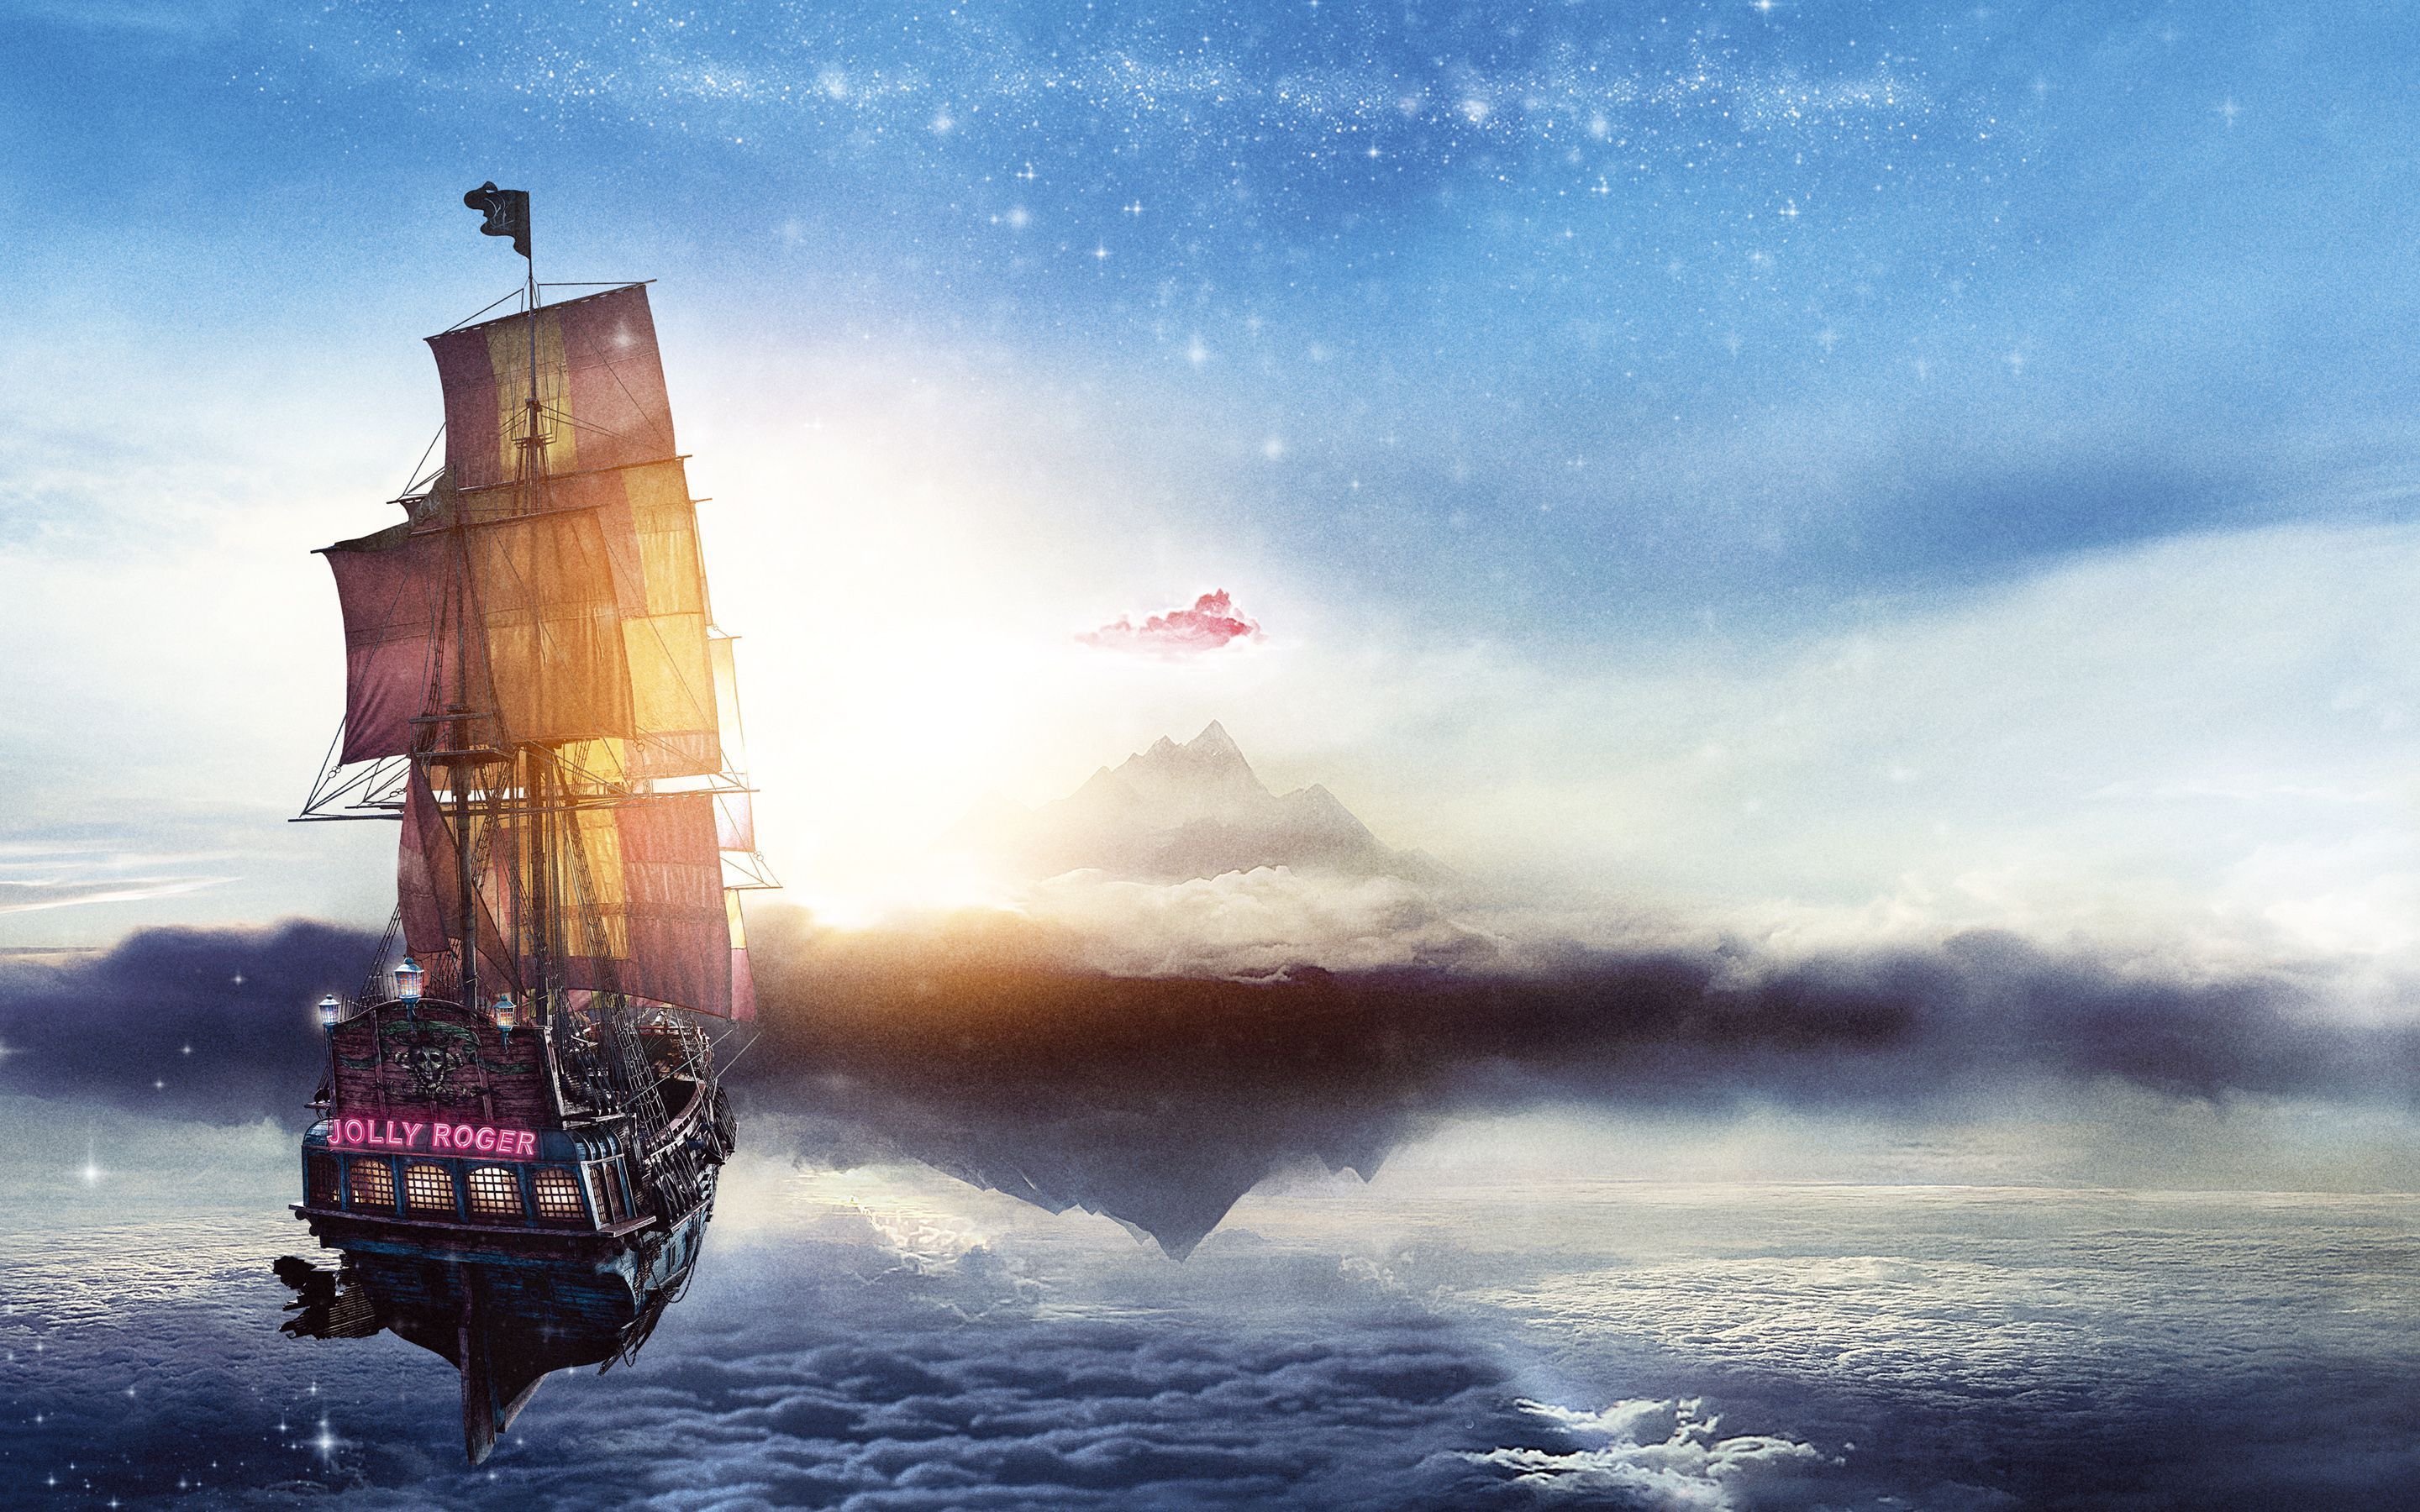 A ship sails through the clouds in the sky. - Pirate